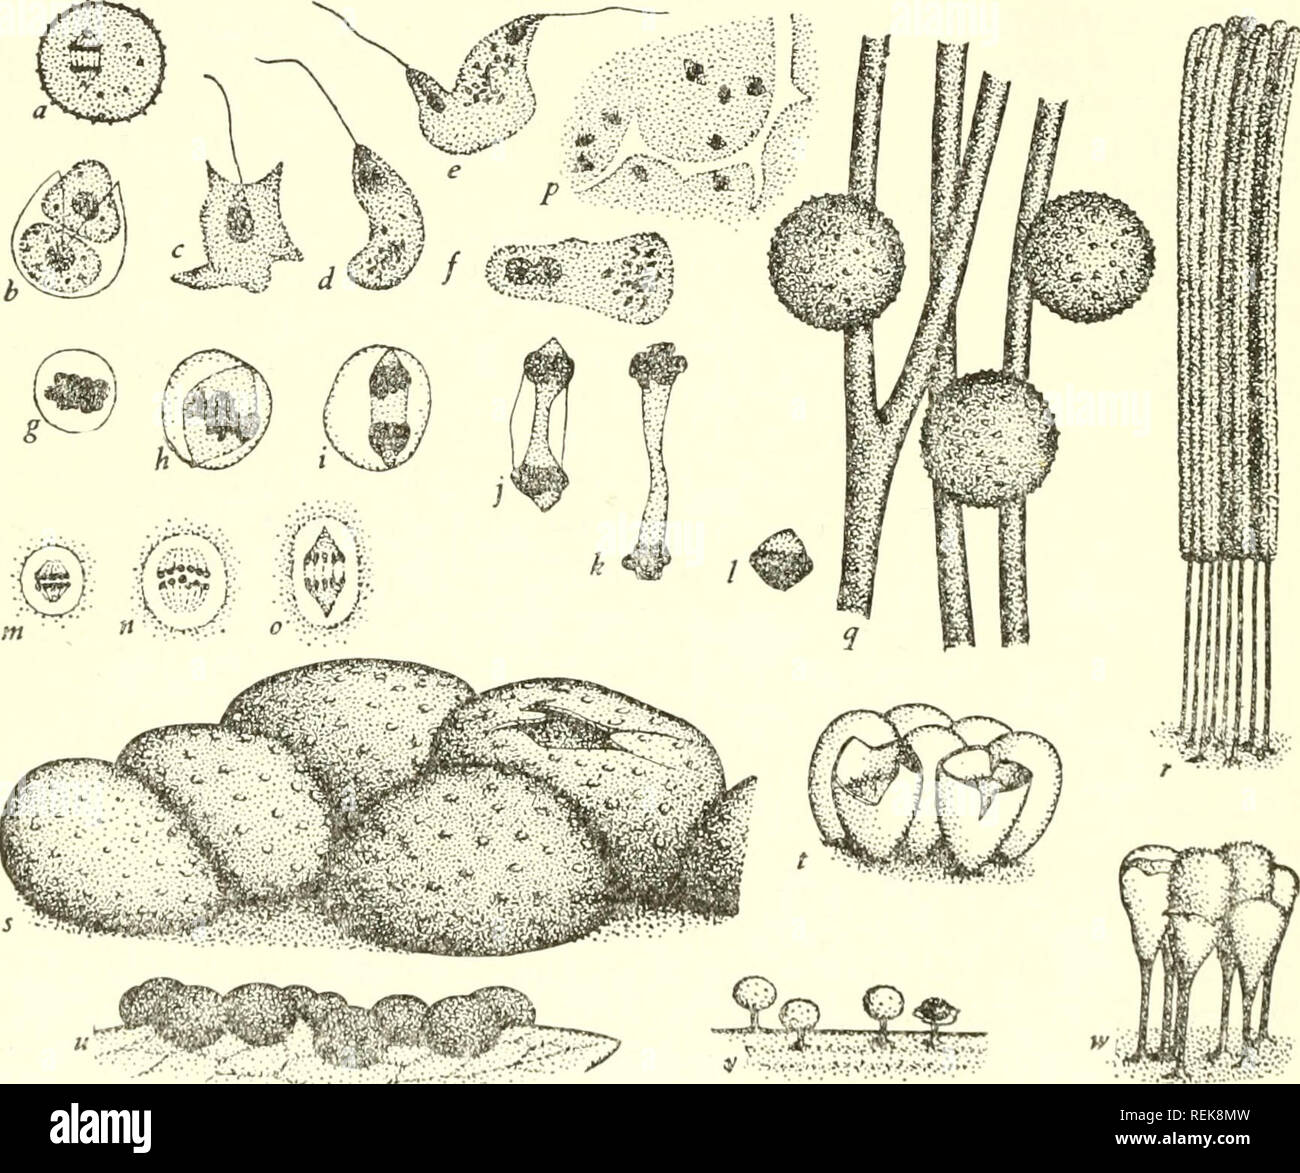 . The classification of lower organisms. Biology. 176] The Classification of Lower Organisms Family 9. Margaritida [Margaritidae] Doflein 1909. Order Margaritaceae Lister op. cit. 202. Family Dianemaceae Macbride N. Am. Slime Molds ed. 2: 237 (1922). Sporangia with pale or yellow spores and a capillitium of smooth threads attached at both ends. Dianema, Margarita. Family 10. Perichaenacea [Perichaenaceae] (Rostafinski) Lankester 1. c. Tribe Perichaenaceae Rostafinski op. cit. 15. Sporangia with pale or yellow spores and a capillitium of unattached smooth threads. Perichaena, Ophiotheca. Family Stock Photo